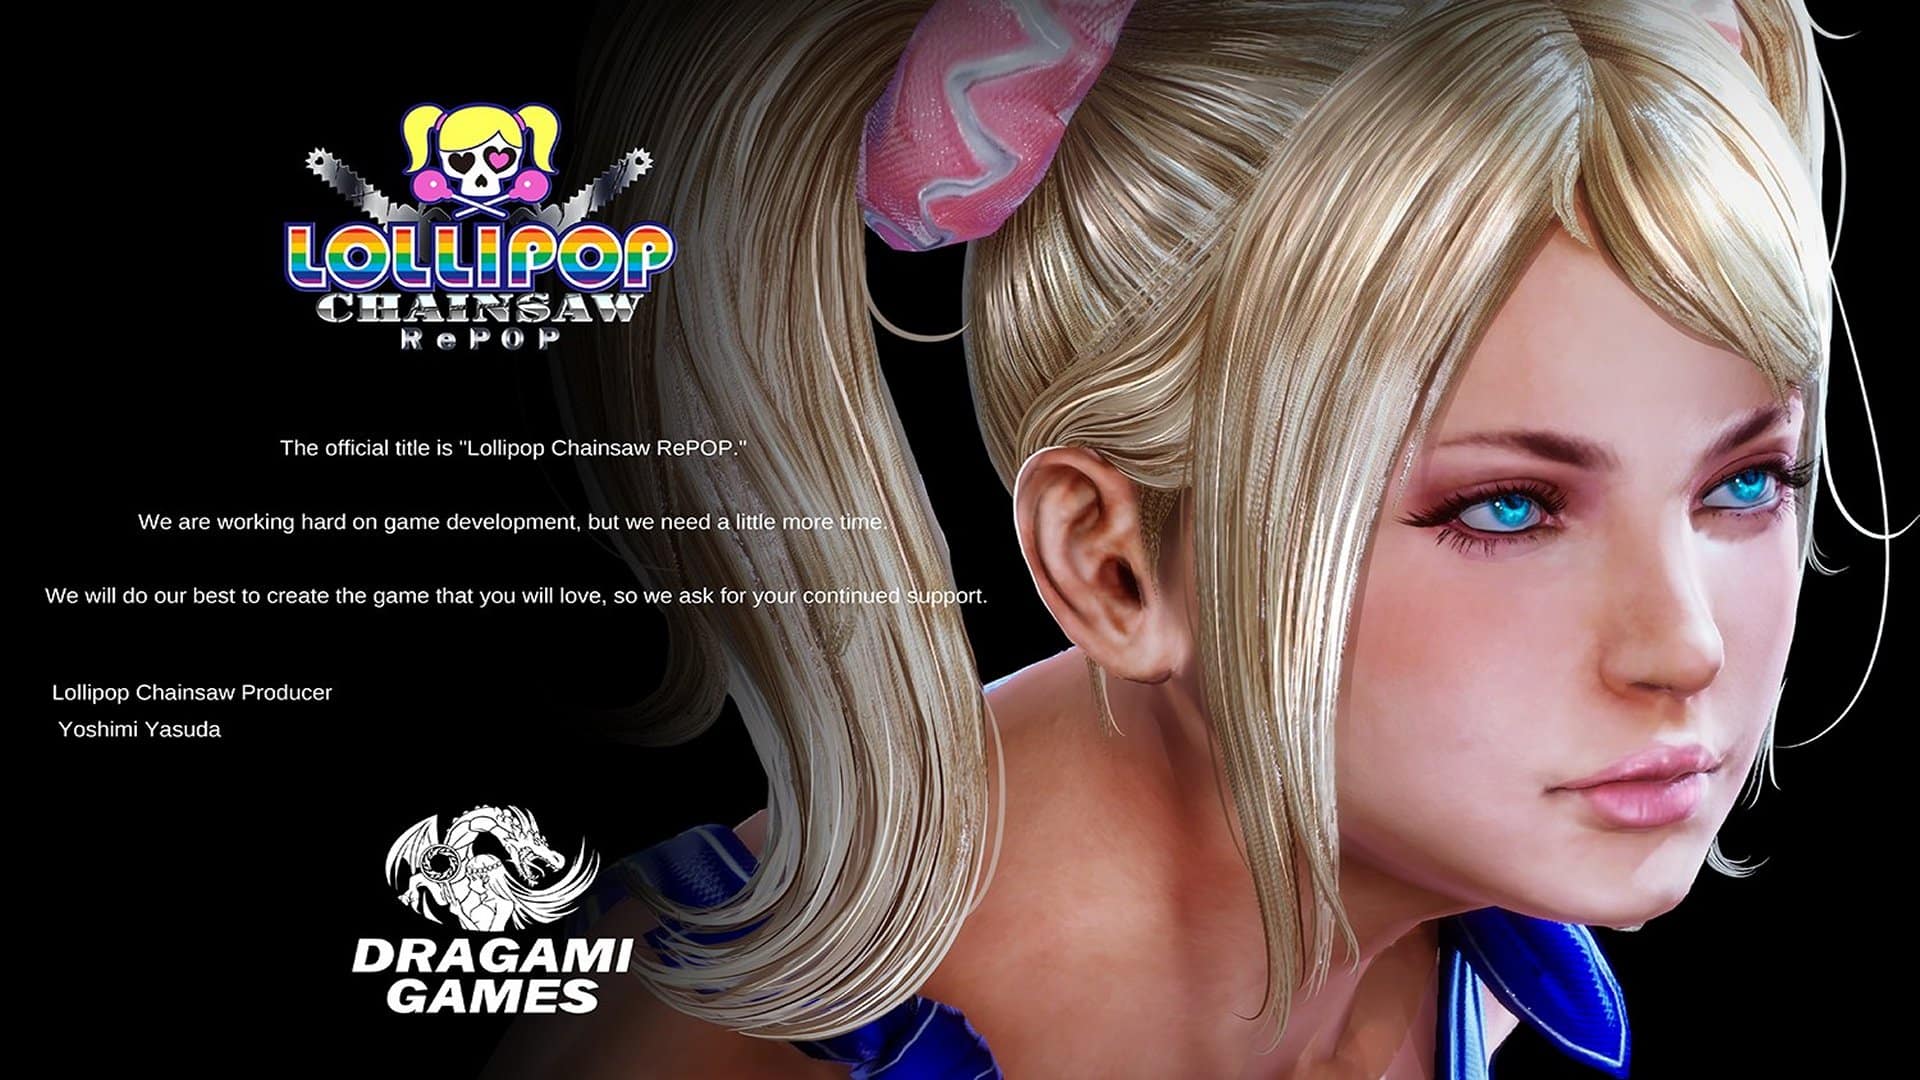 Lollipop Chainsaw Remake Is Now Lollipop Chainsaw RePOP, Delayed to 2024 Announcement